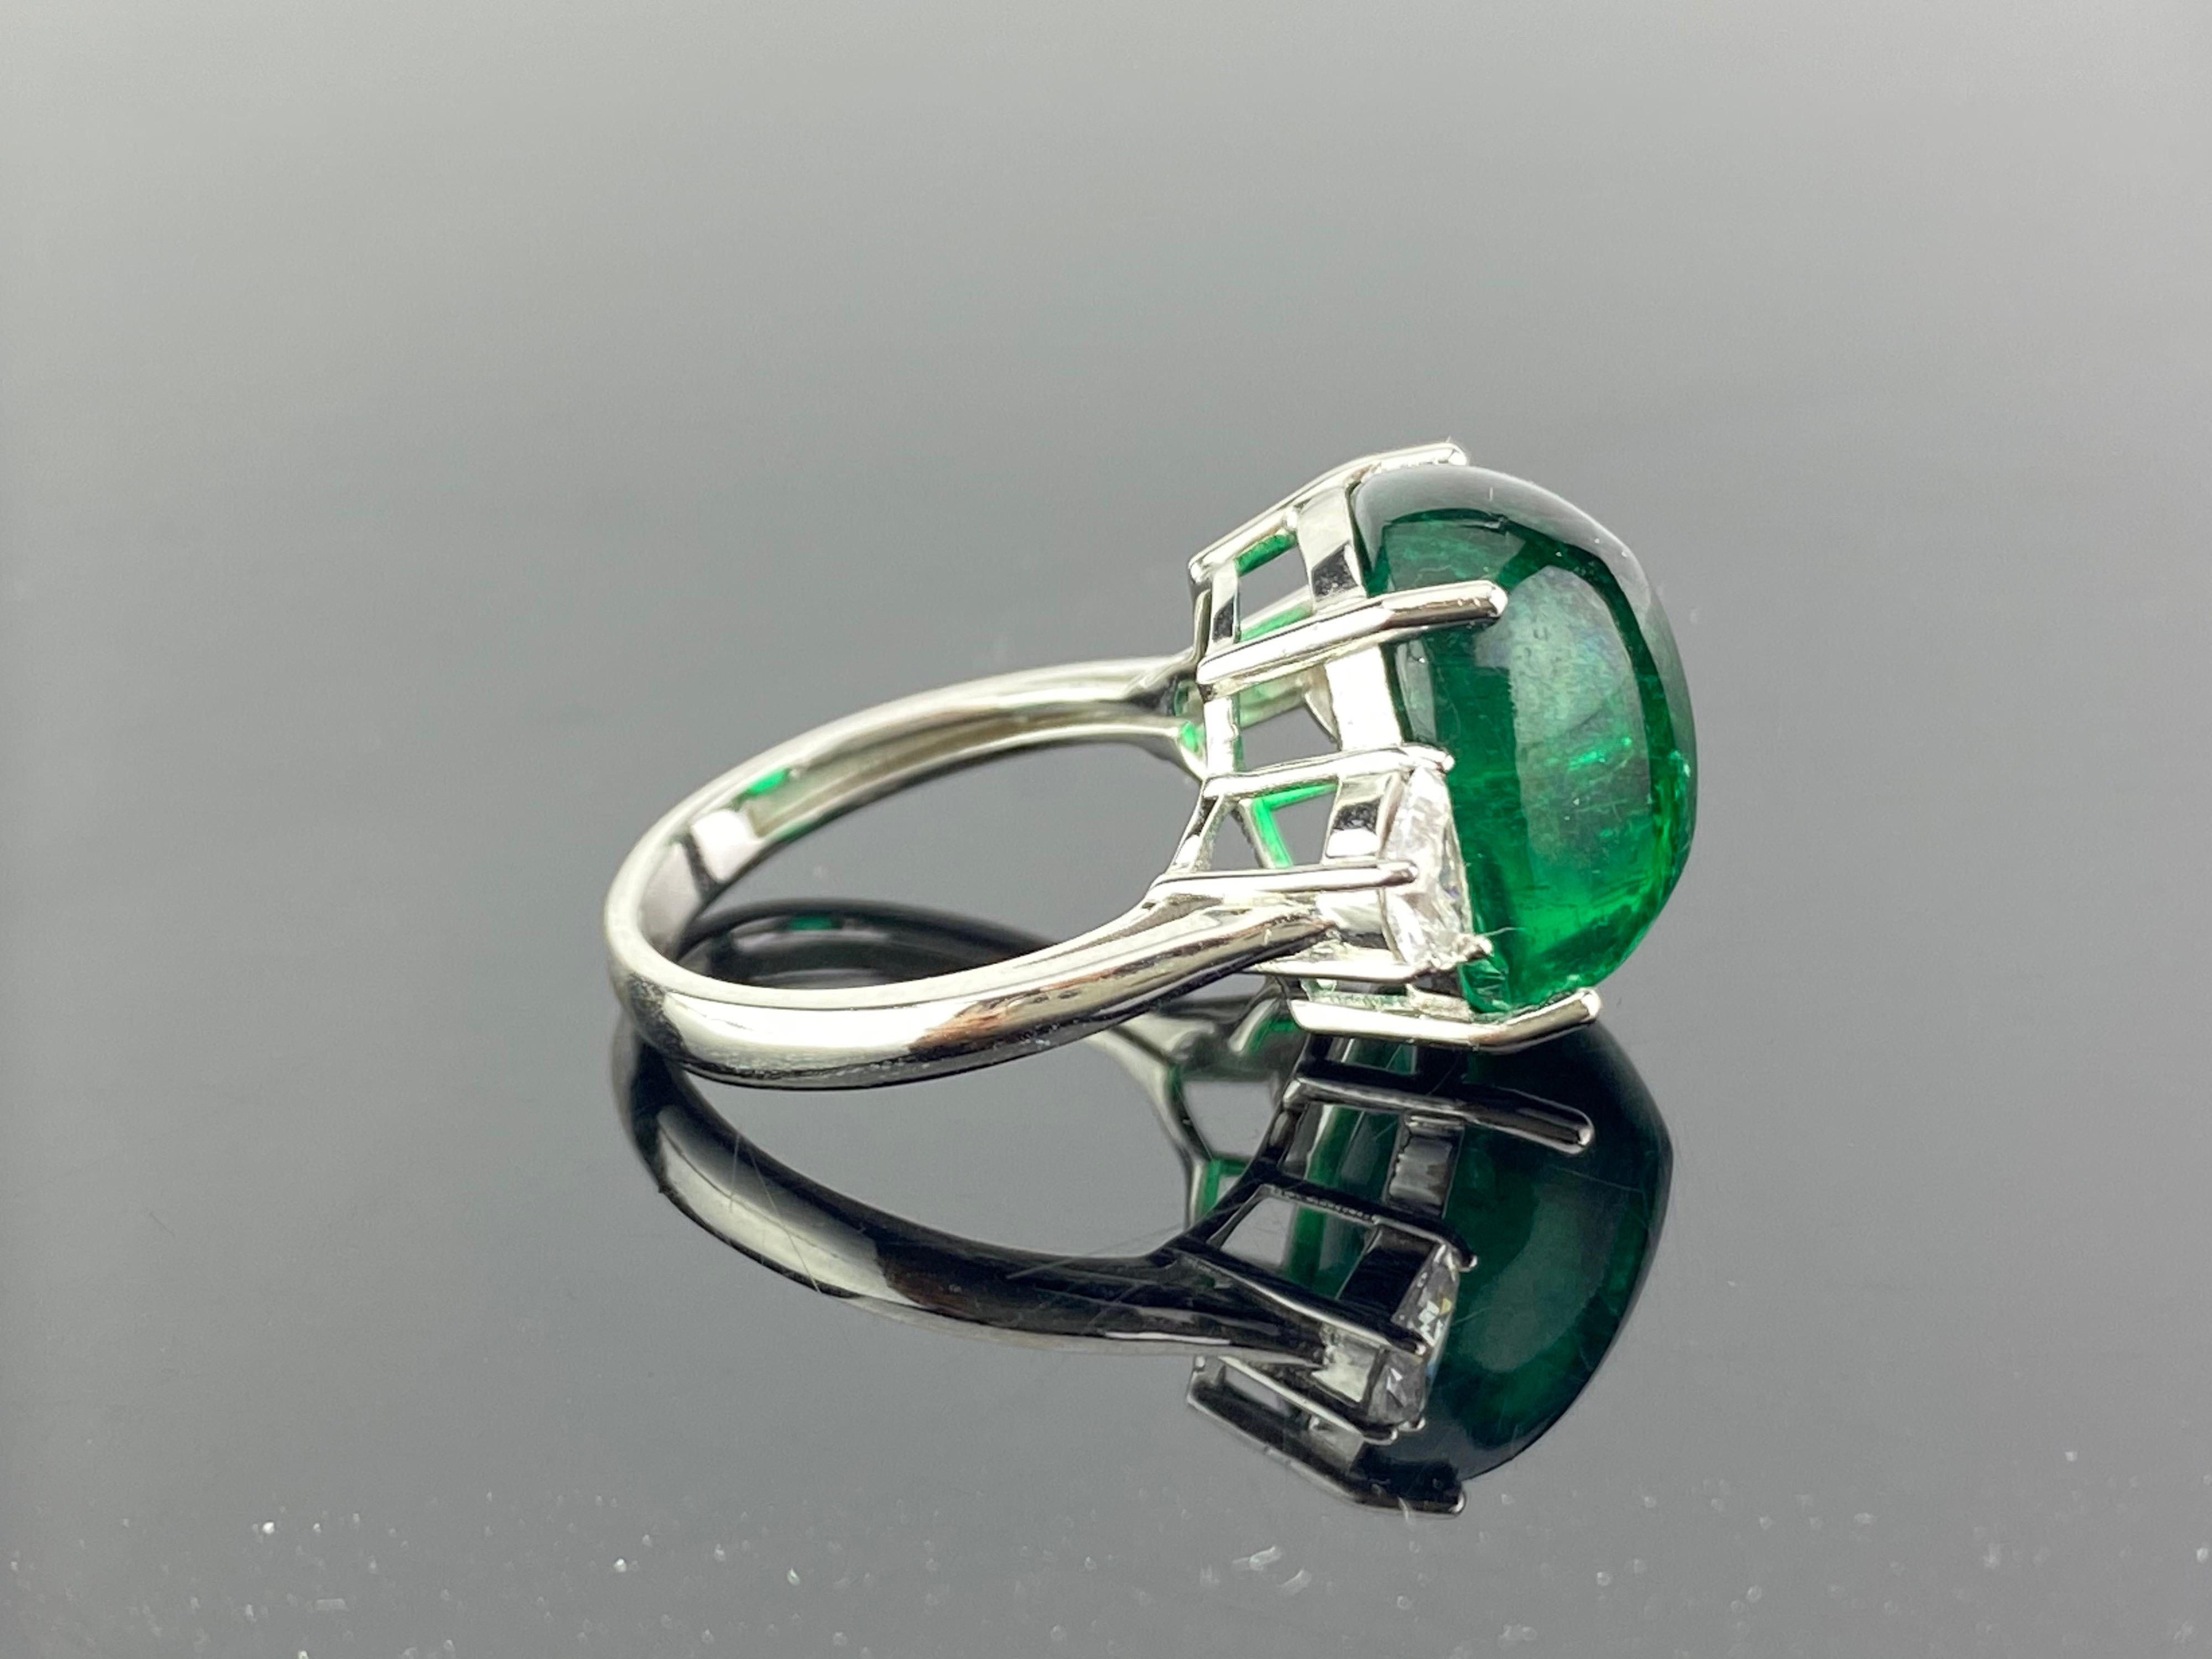 A unique 13.47 carat sugarloaf Zambian Emerald,  three stone engagement ring, with 2 half-moon side stone diamonds. The emerald is of great lustre and has an ideal colour. All set in 18K white gold. Currently a ring size US 6.5, but we can resize